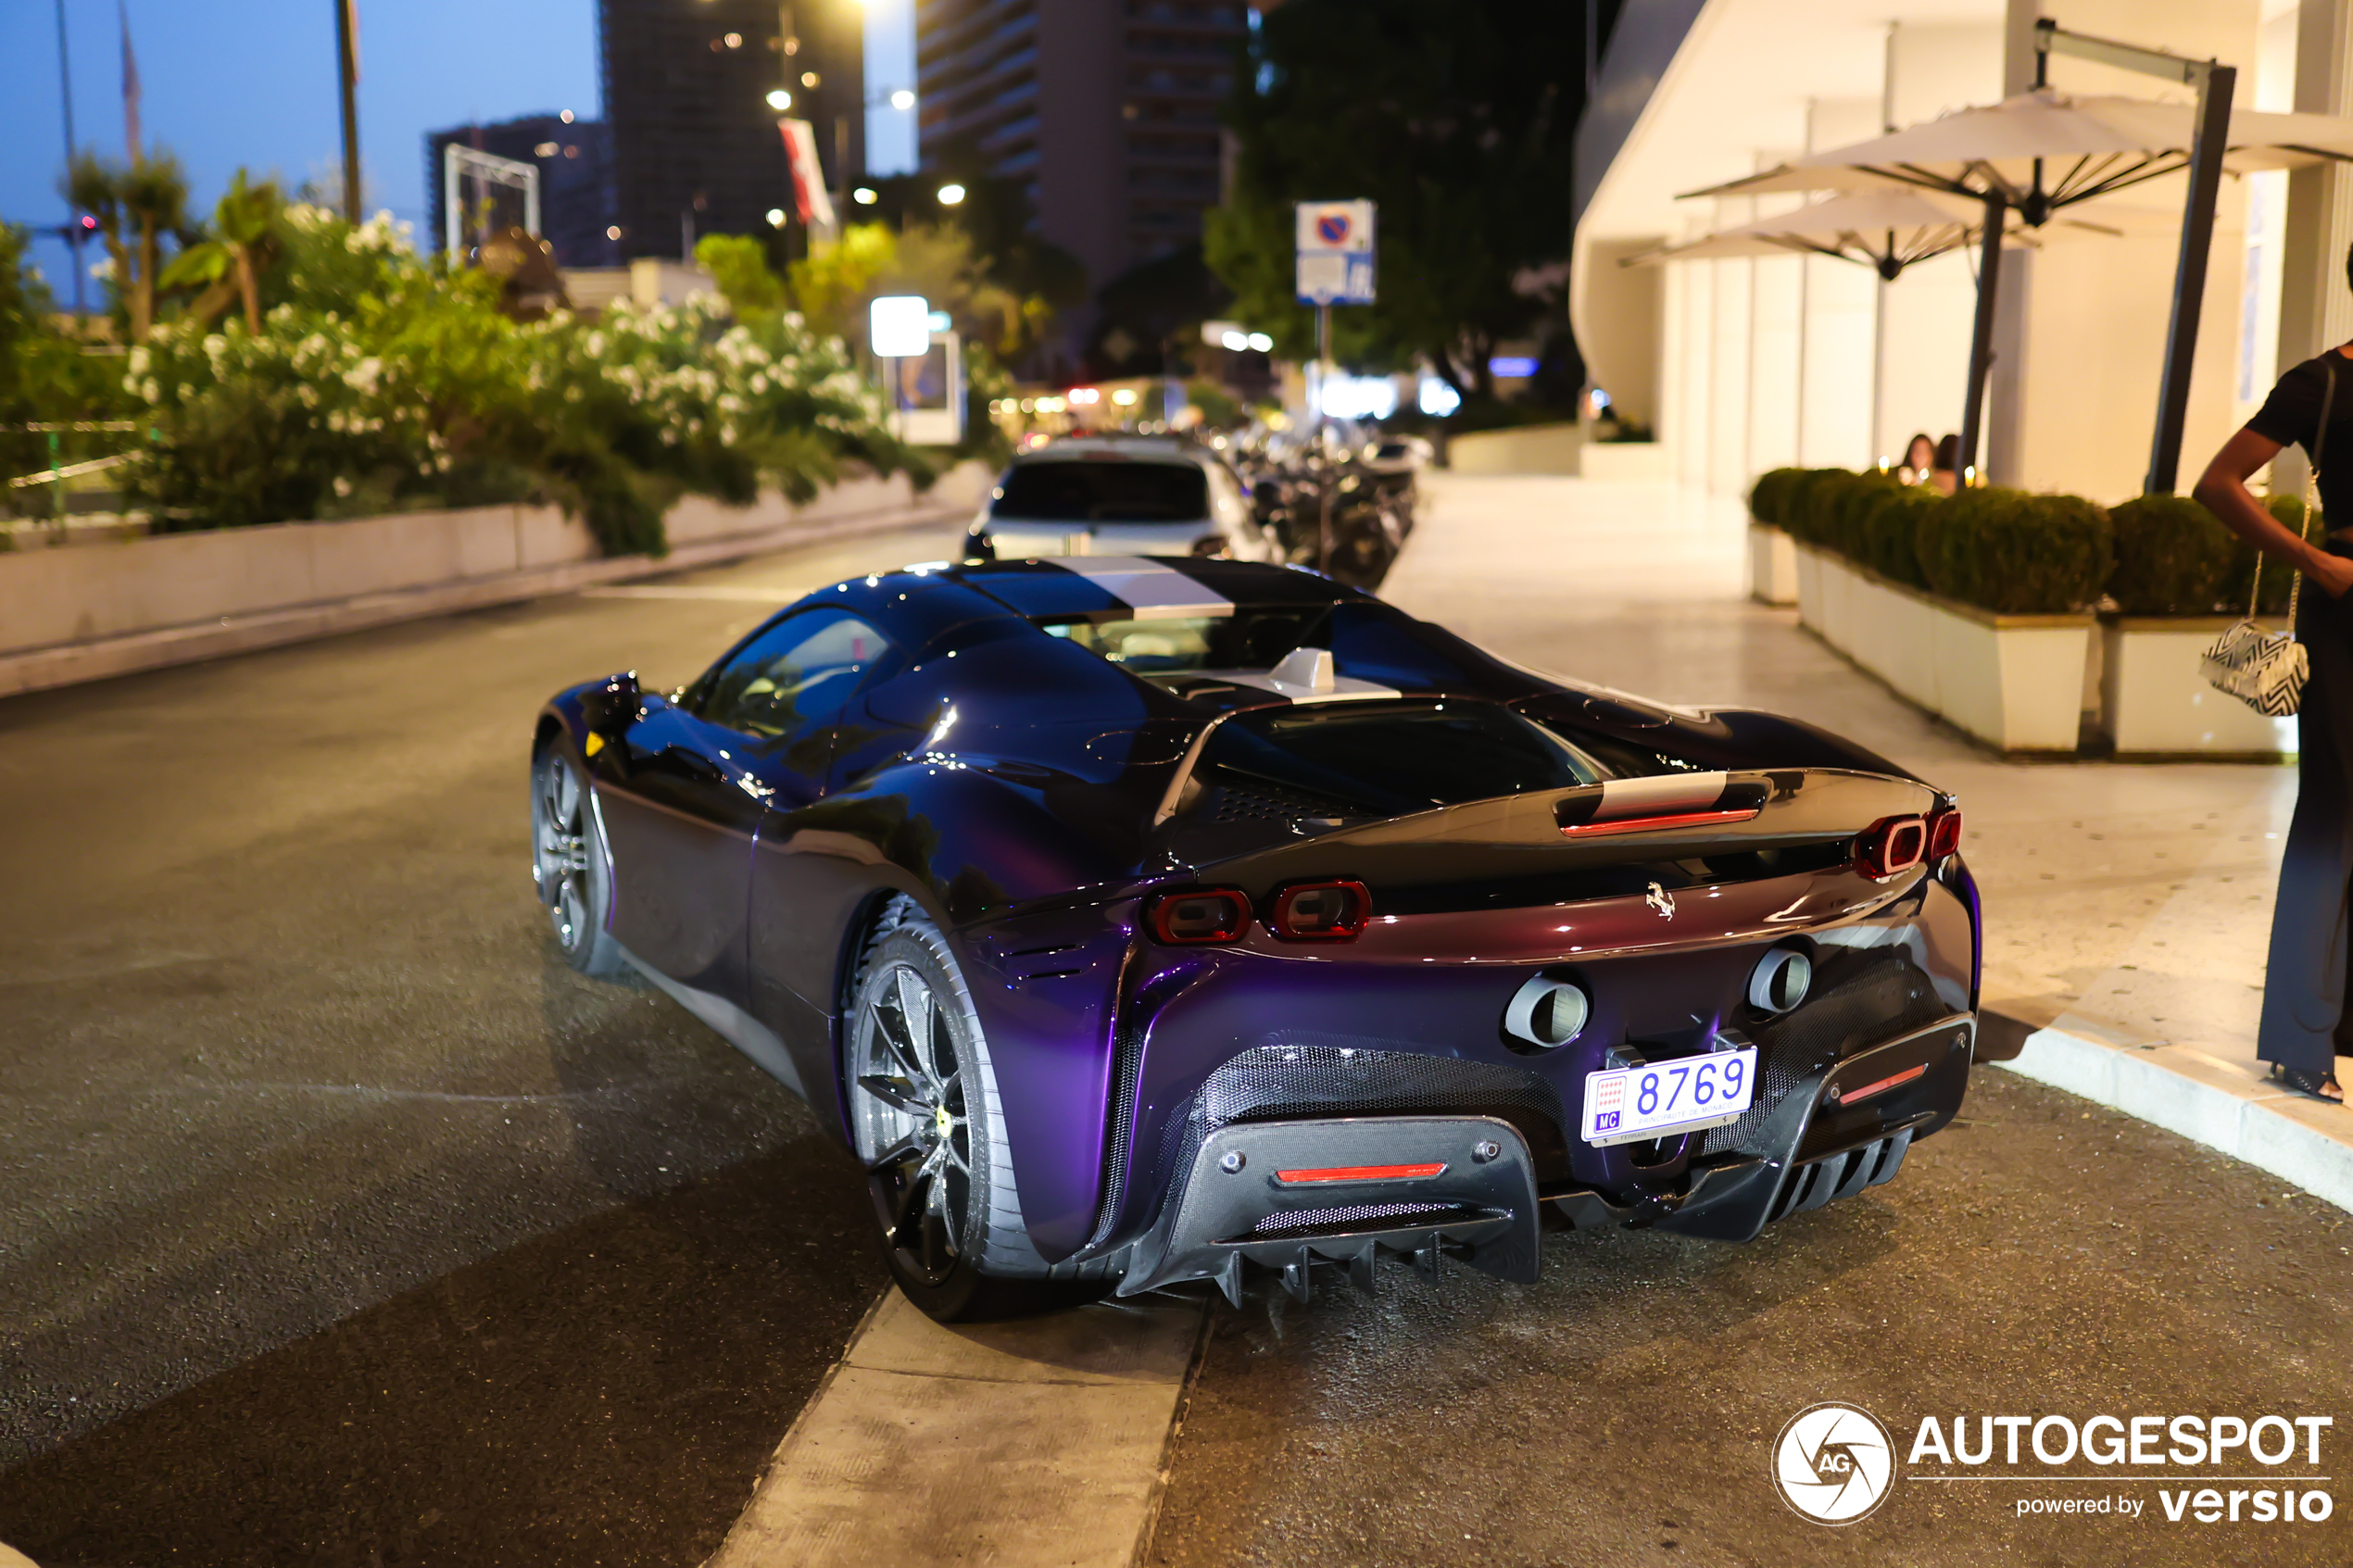 The beautiful violet SF90 Spider emerges again in Monaco.